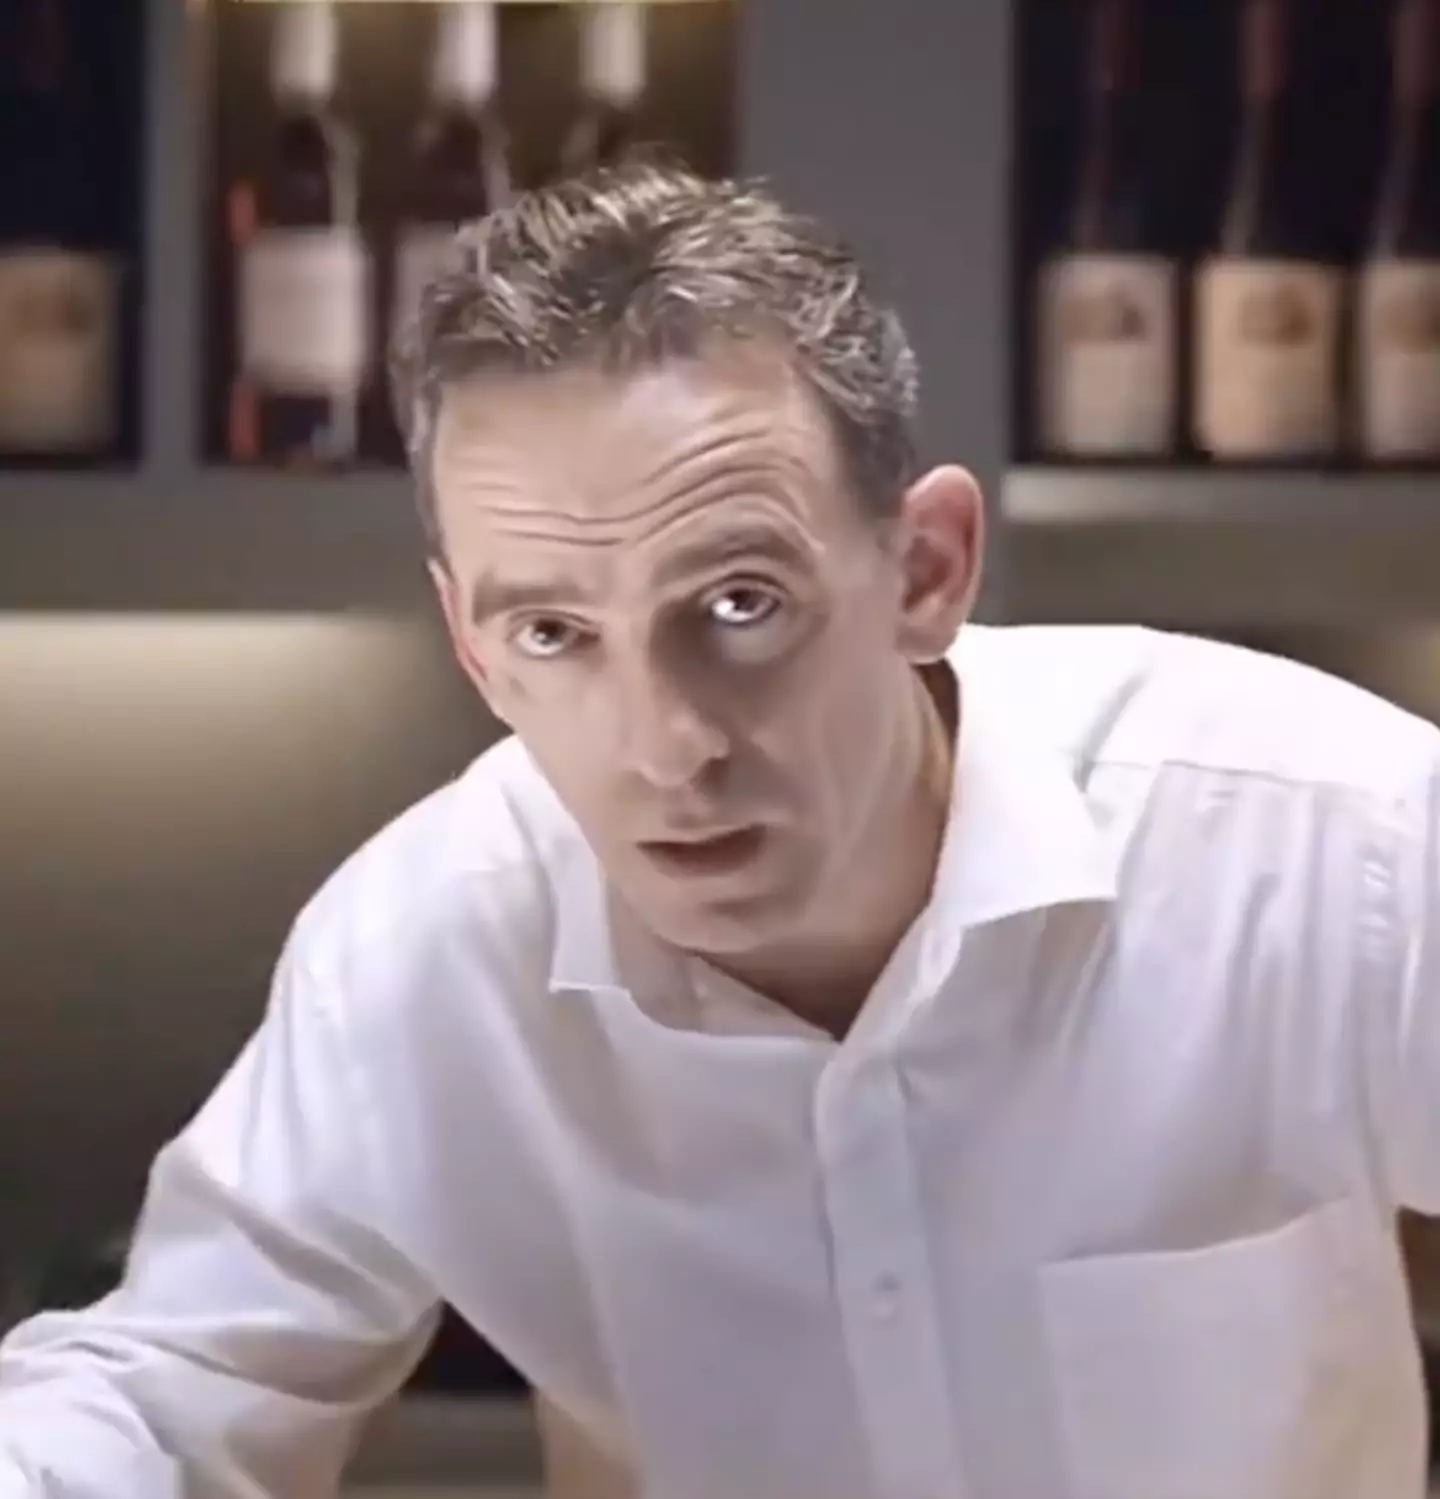 Adrian Schiller’s award-winning drink driving advert has resurfaced on social media following the actor’s 'unexpected' death.